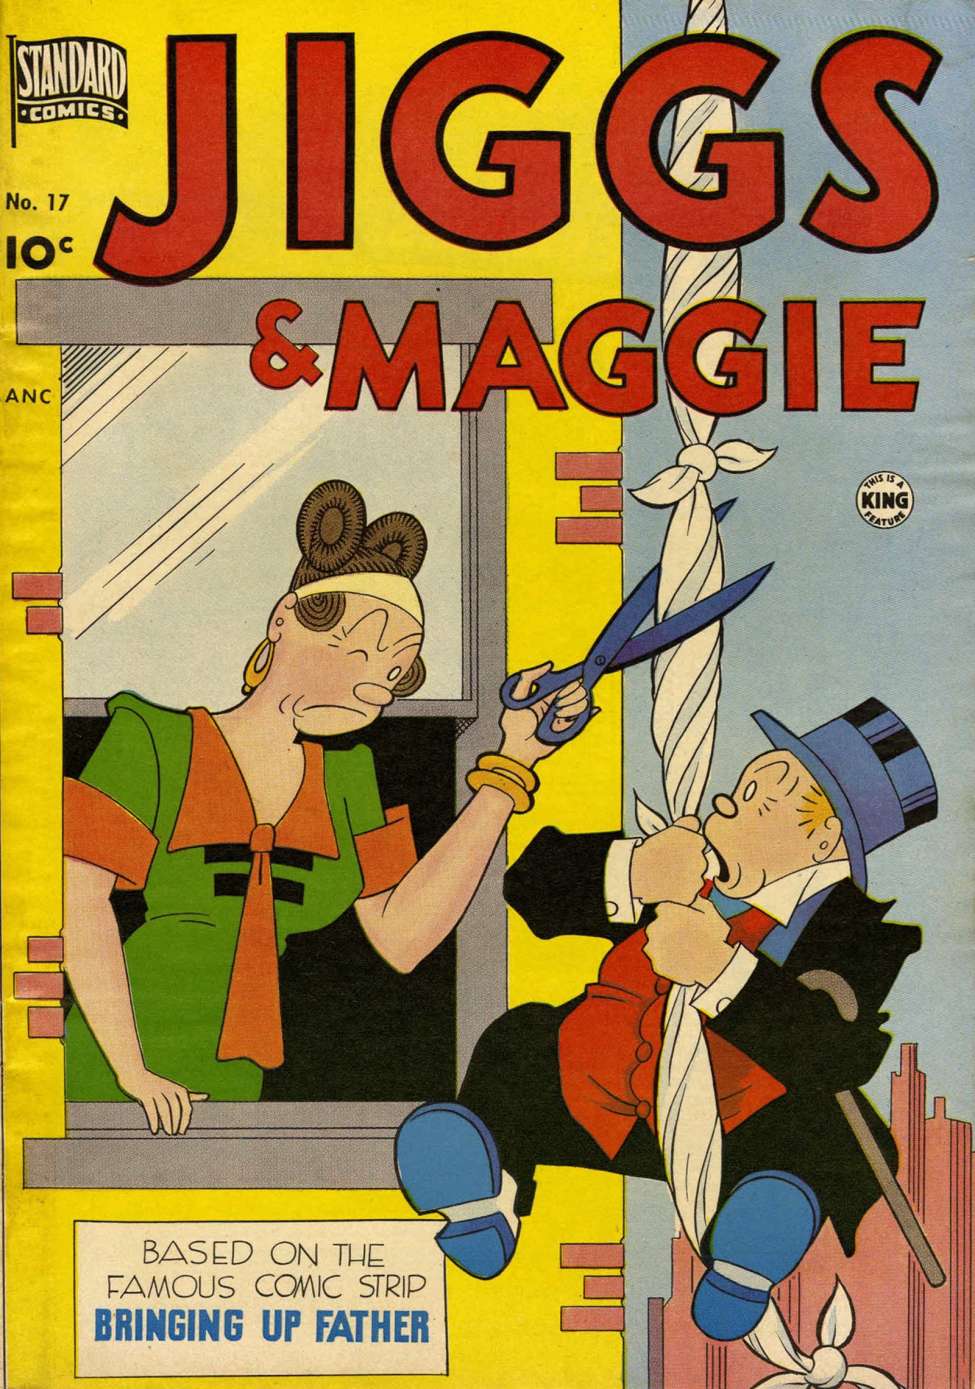 Book Cover For Jiggs & Maggie 17